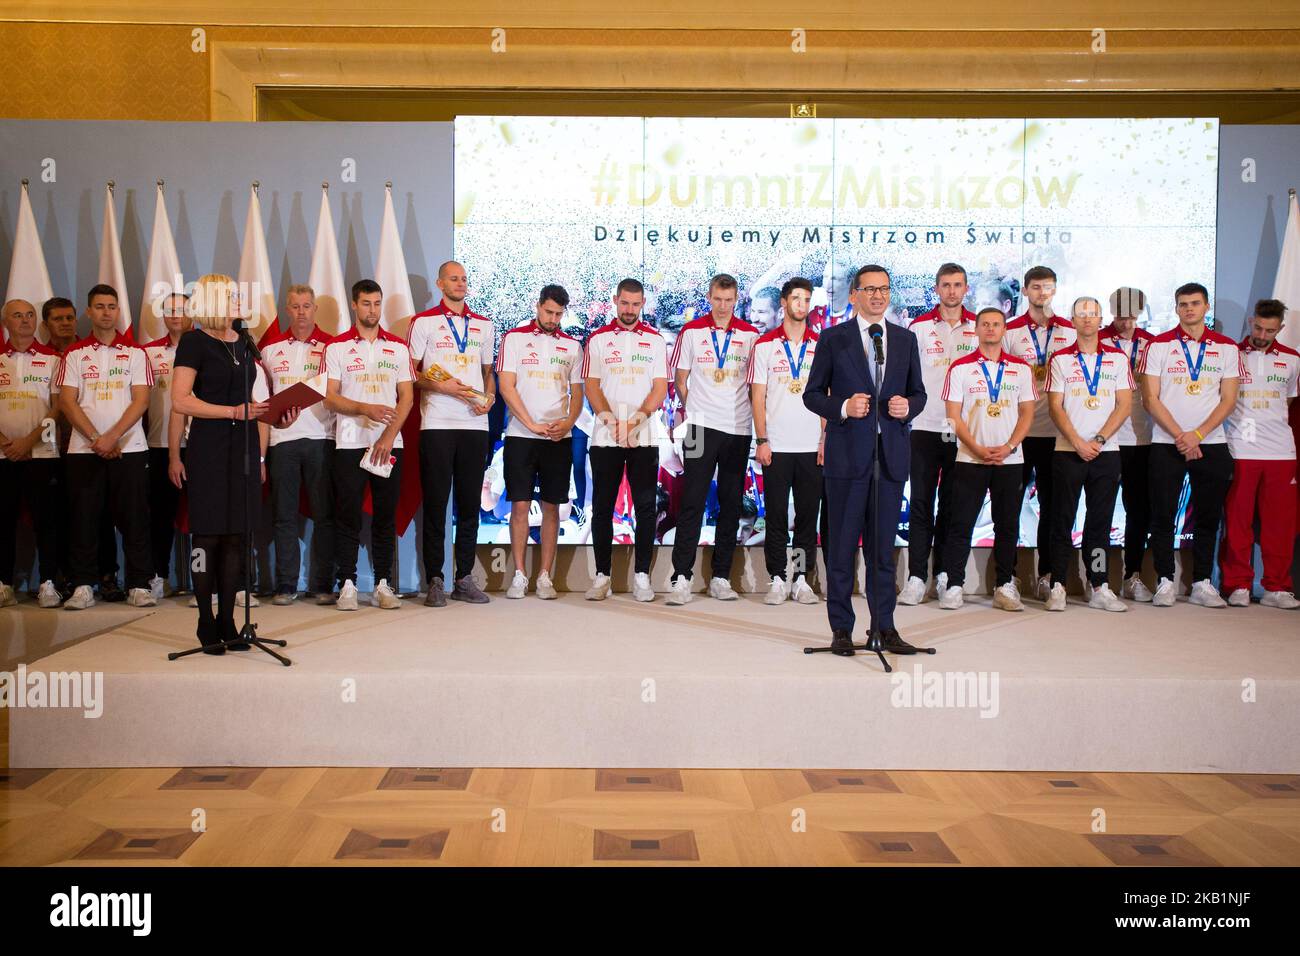 Prime Minister of Poland Mateusz Morawiecki during the meeting with Poland men's national volleyball team at Chancellery of the Prime Minister in Warsaw, Poland on 1 October 2018. Poland won the gold medal after defeating Brazil in FIVB Volleyball Men's World Championship Final in Turin on 30 September. (Photo by Mateusz Wlodarczyk/NurPhoto) Stock Photo